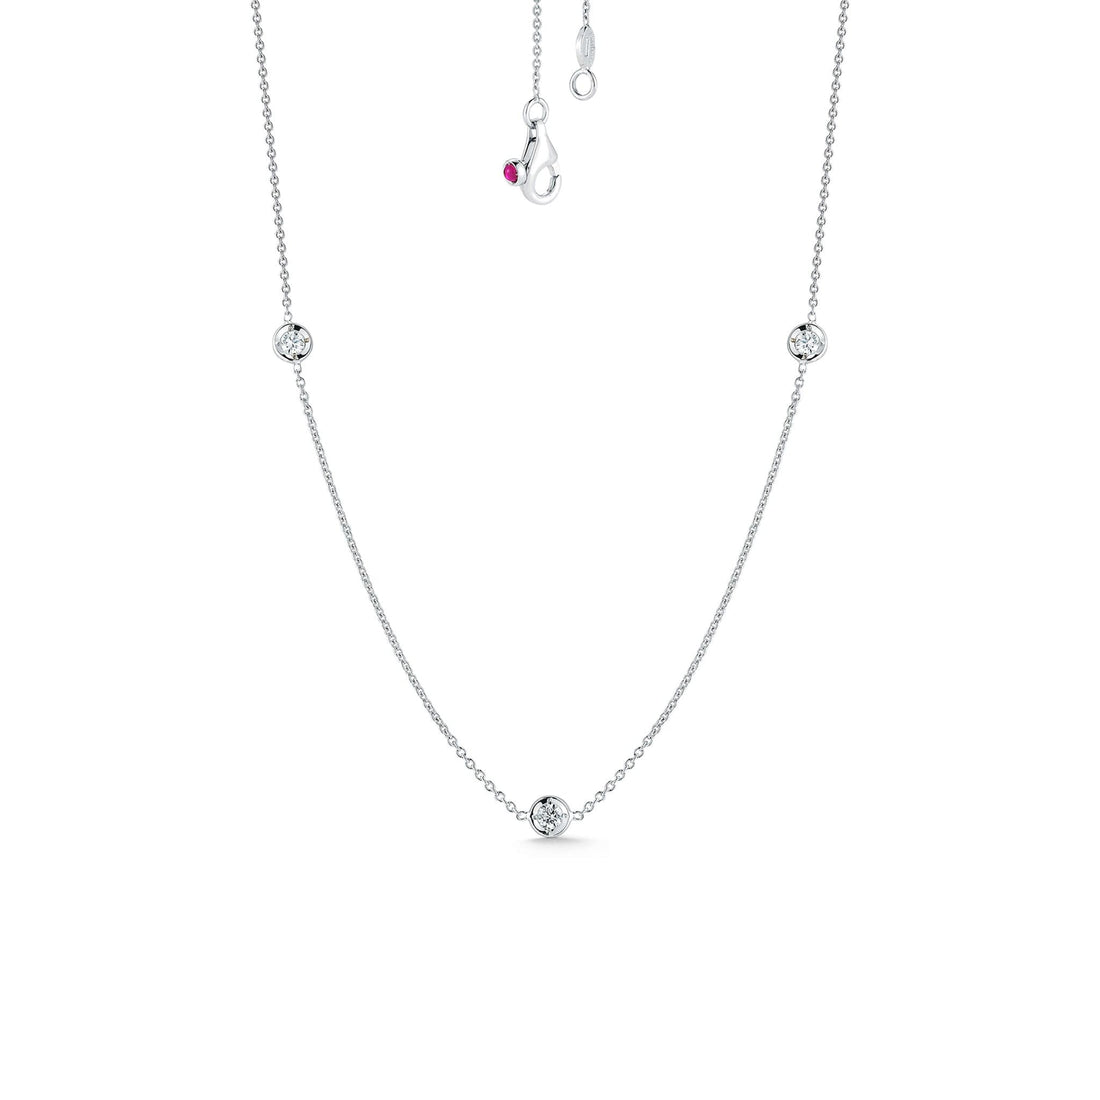 Roberto Coin 18K White Gold Diamonds By The Inch 11 Station Necklace -  000942AW44X0